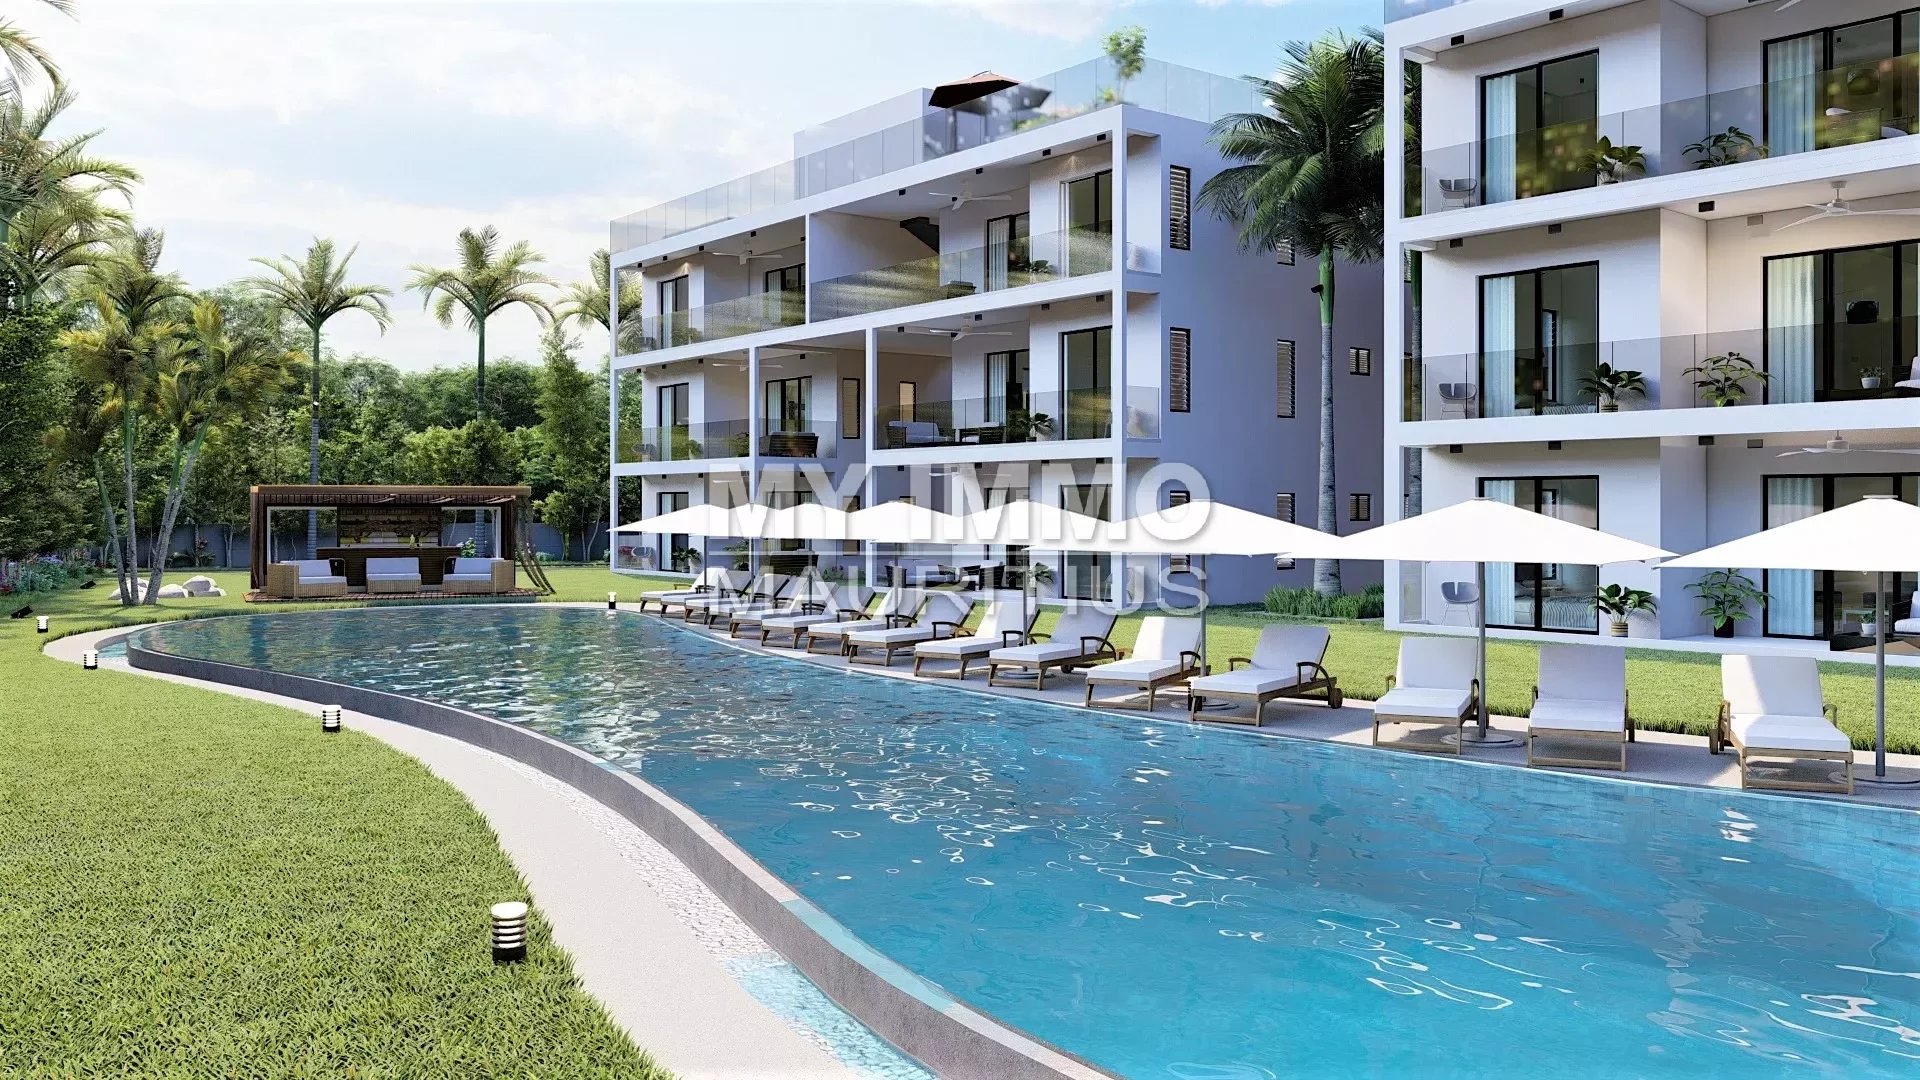 Don't Miss Out on These Spacious 3-Bedroom Apartments in Pereybere